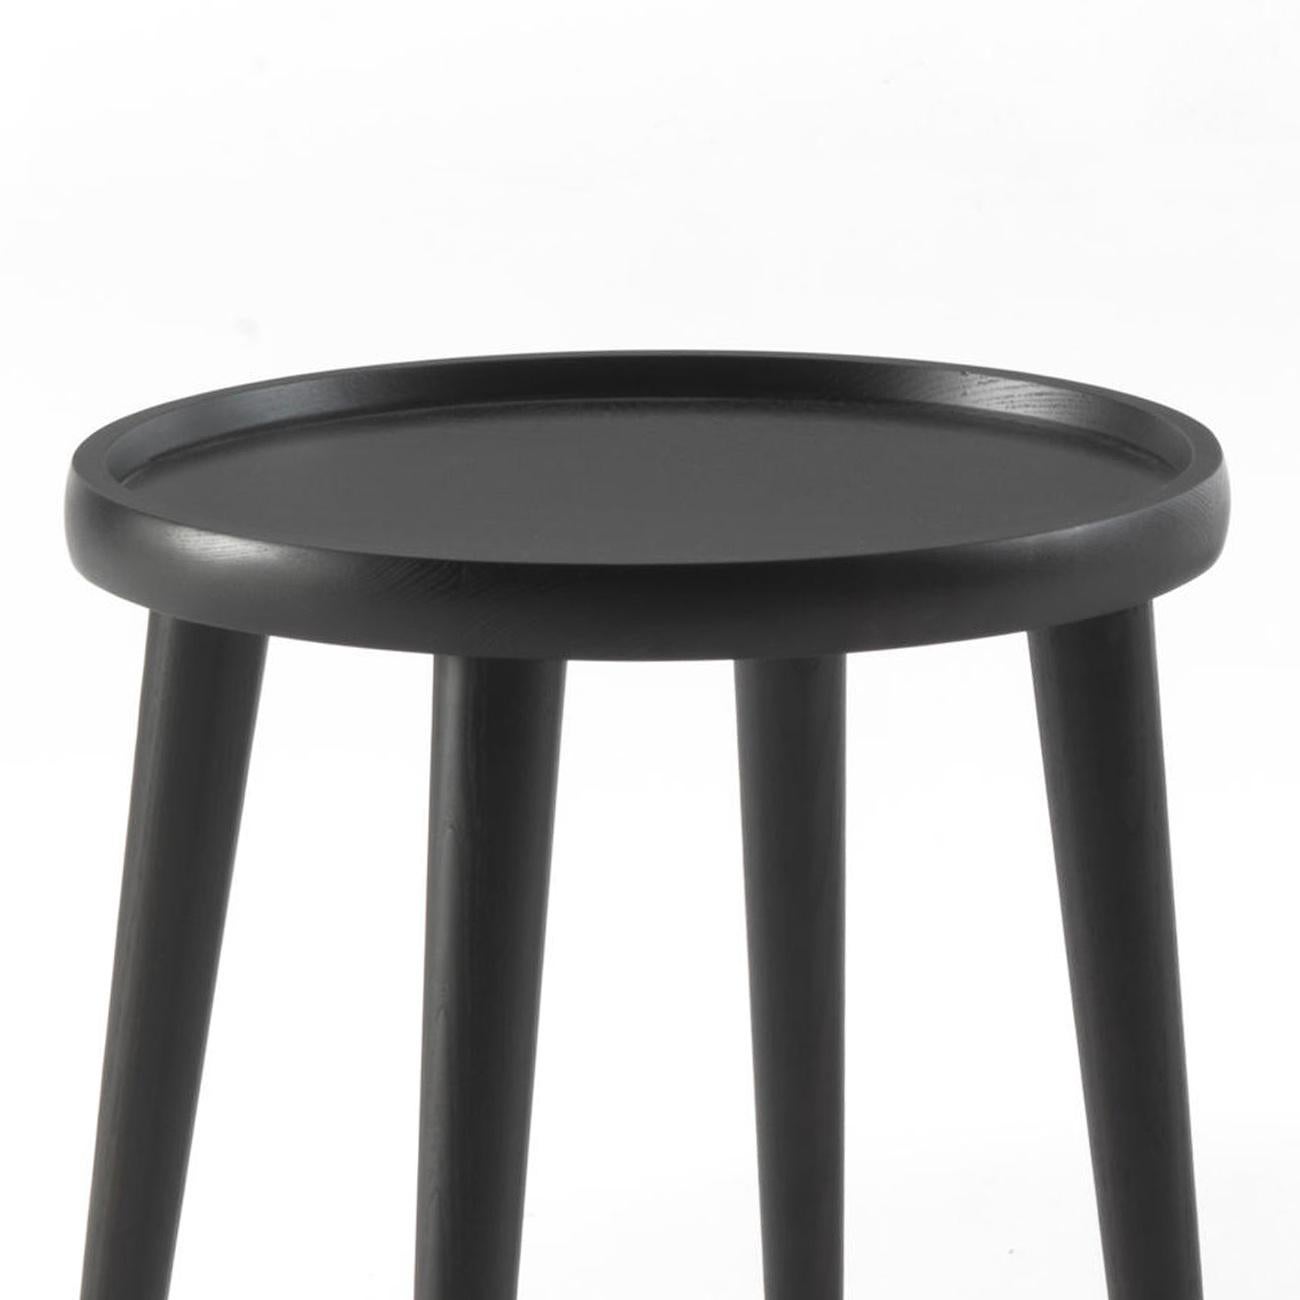 Side Table Domio Leather with solid ash base in
blackened stained finish. Top covered with black
genuine leather.